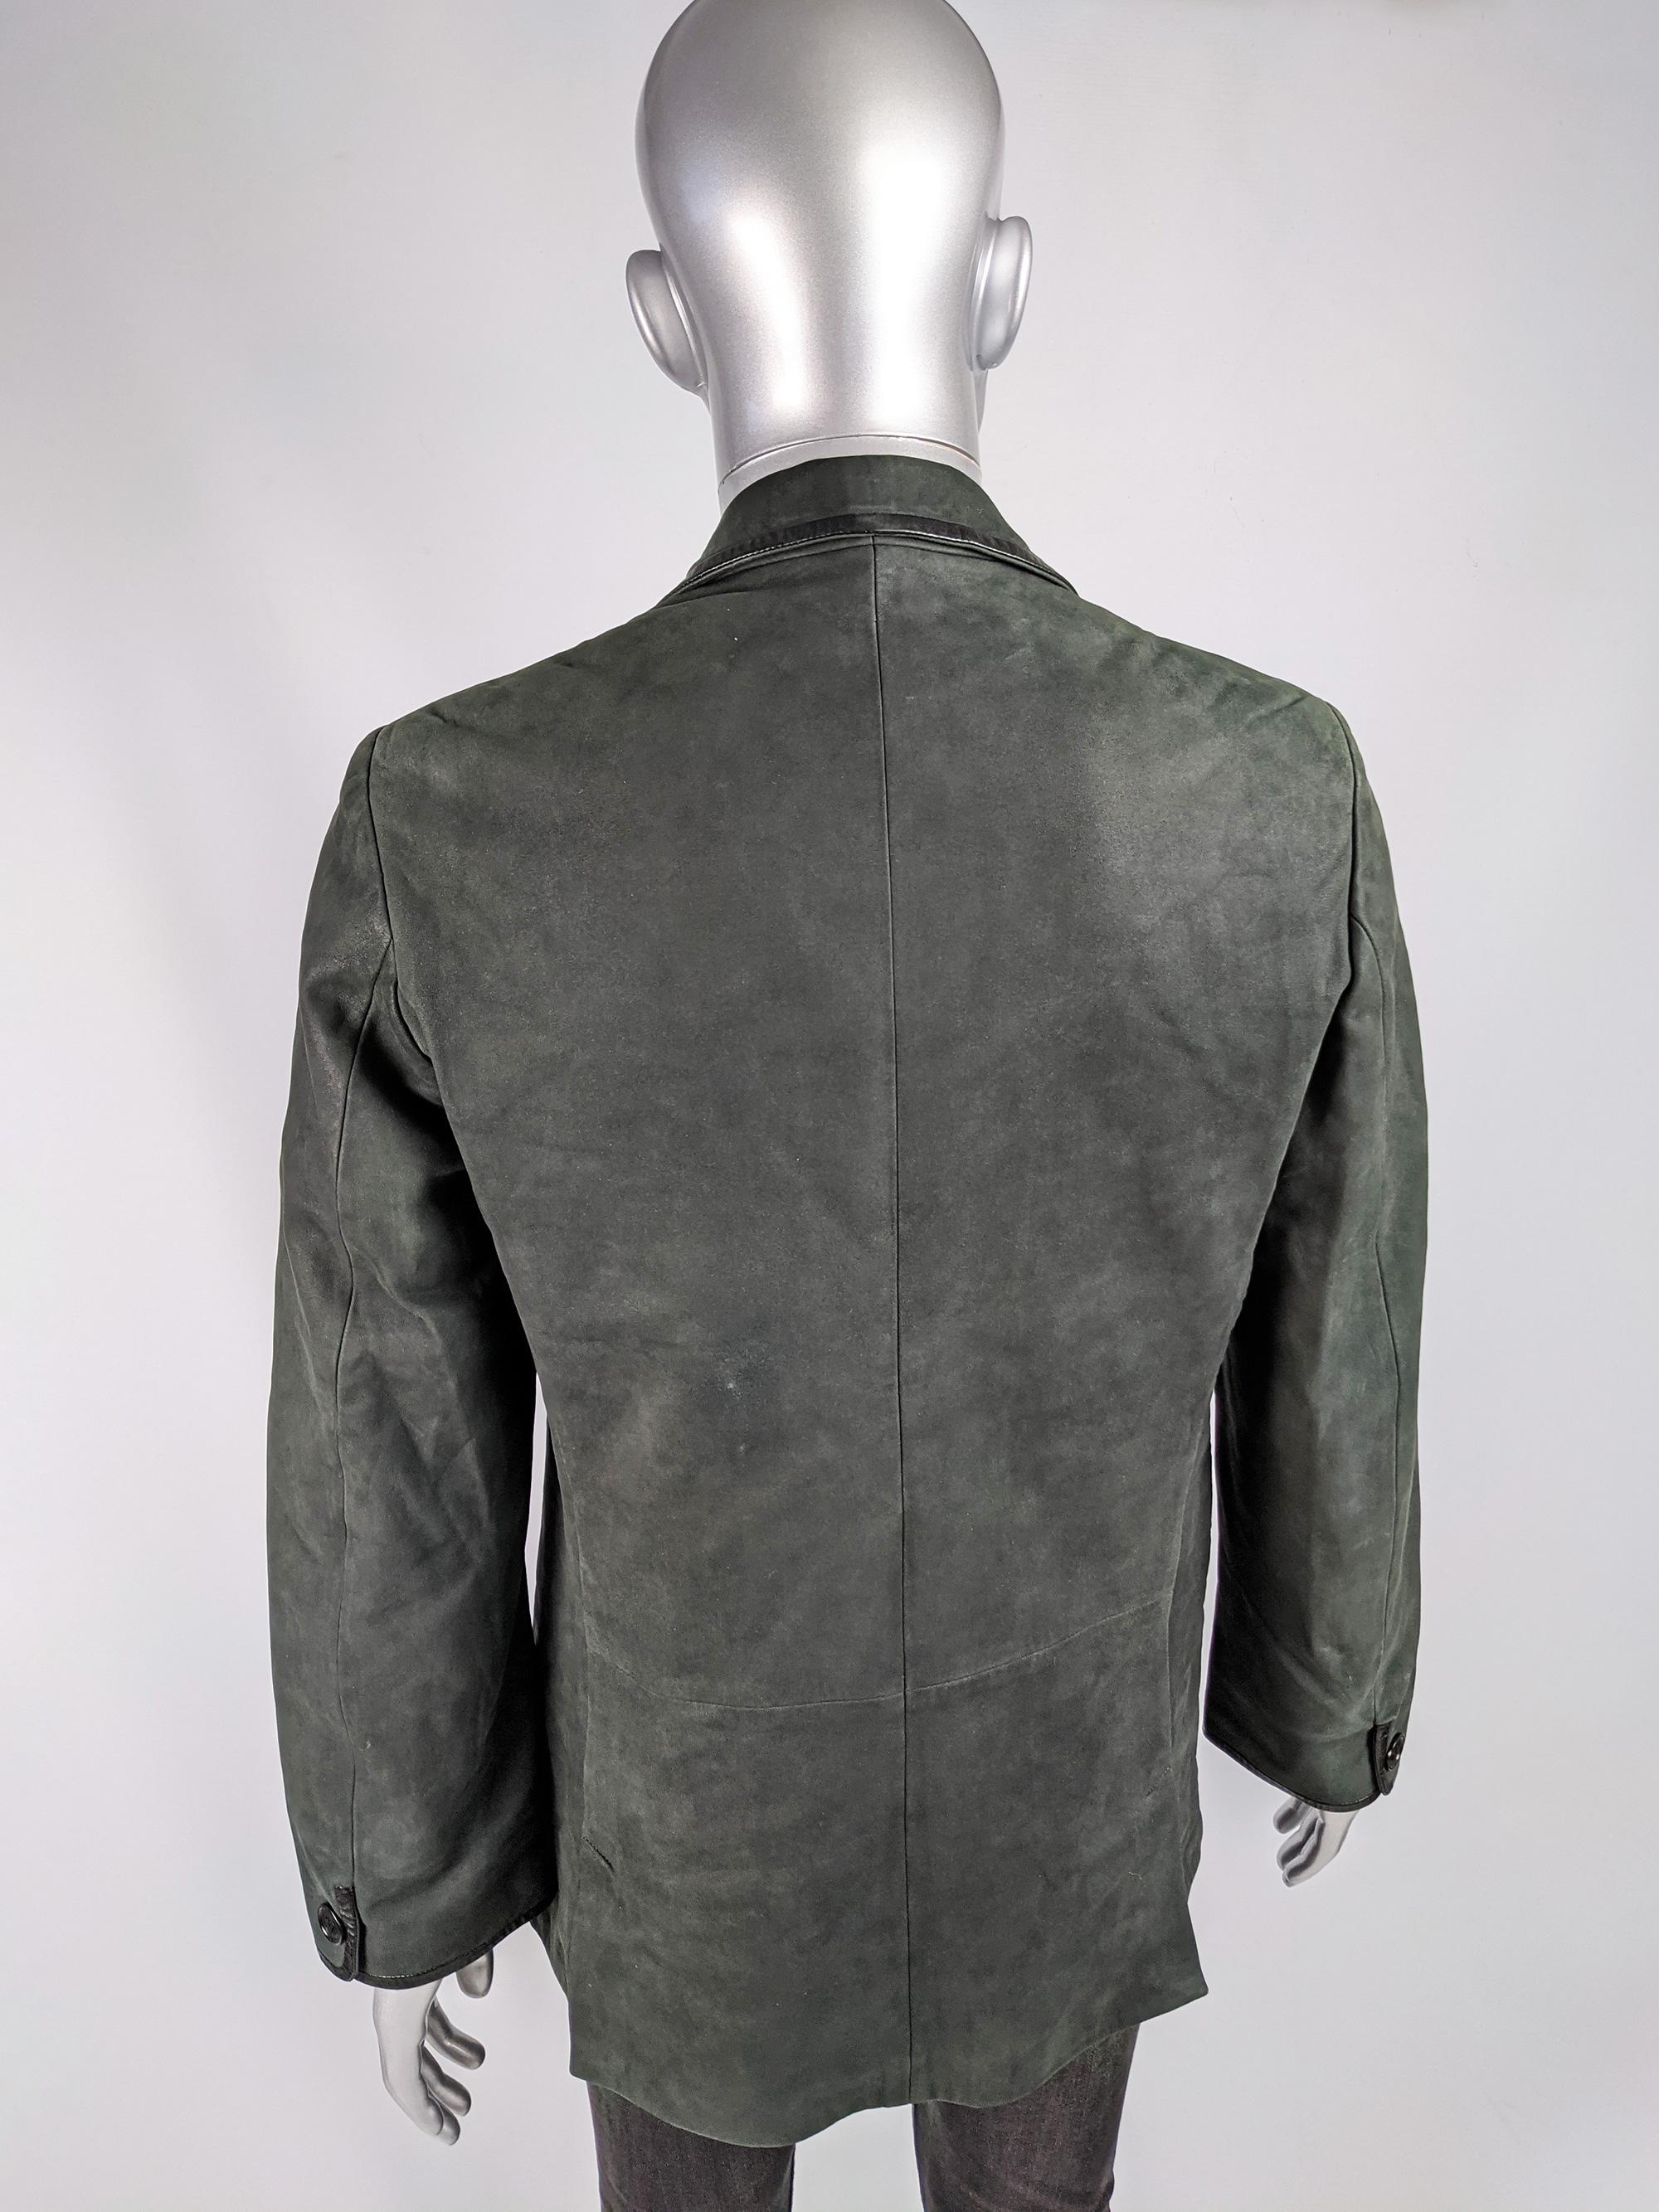 Gianni Versace Dark Green Suede Mens Jacket In Good Condition For Sale In Doncaster, South Yorkshire